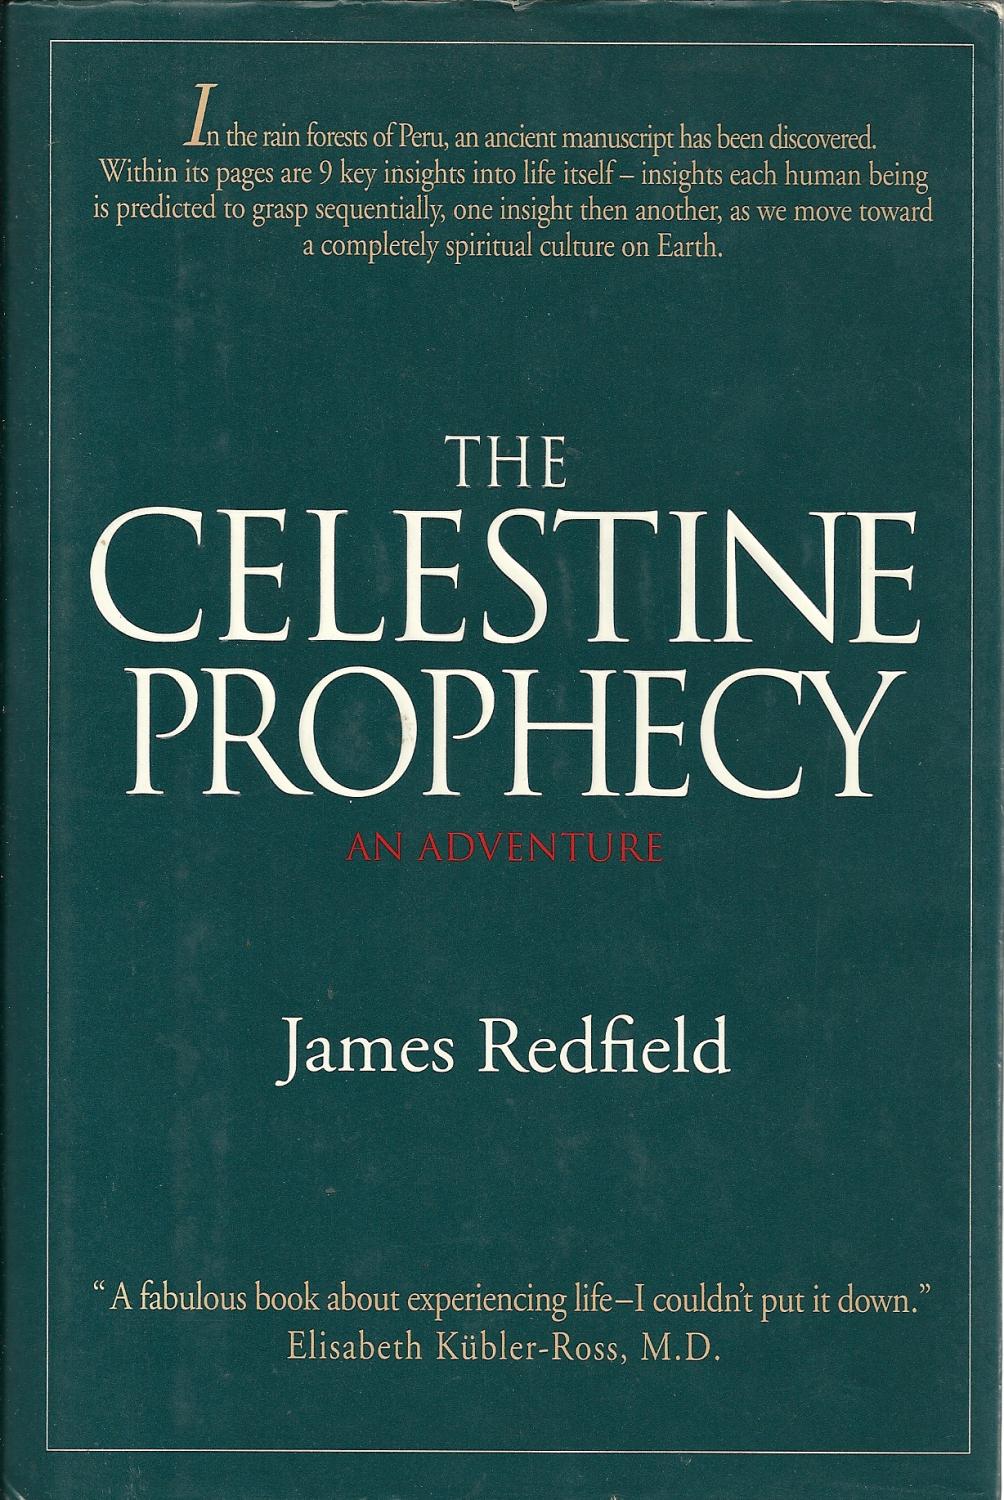 The celestine prophecy by james redfield book review